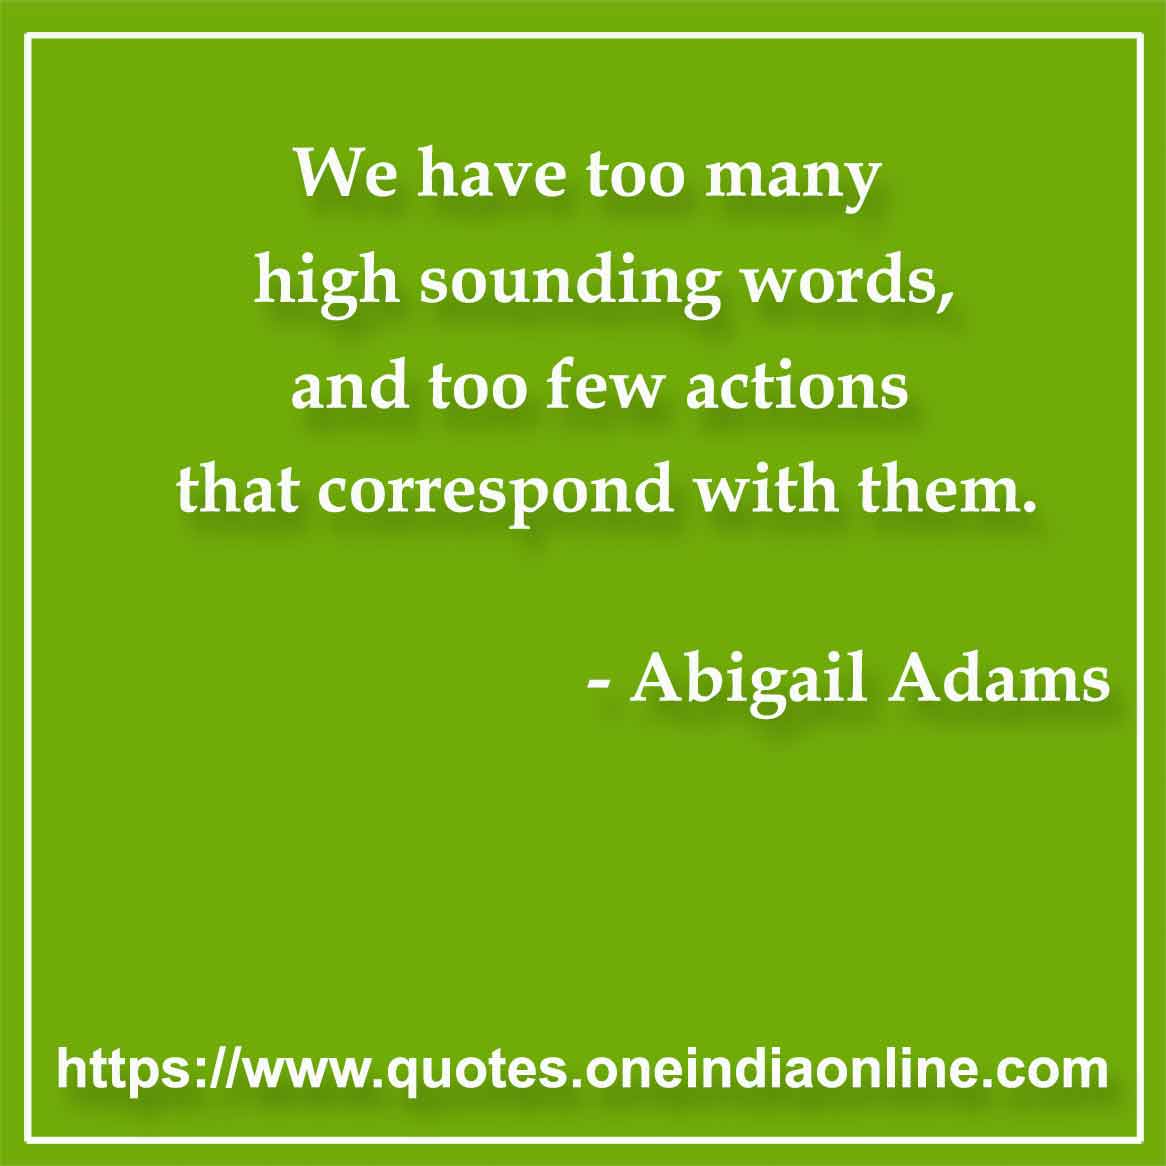 We have too many high sounding words, and too few actions that correspond with them.